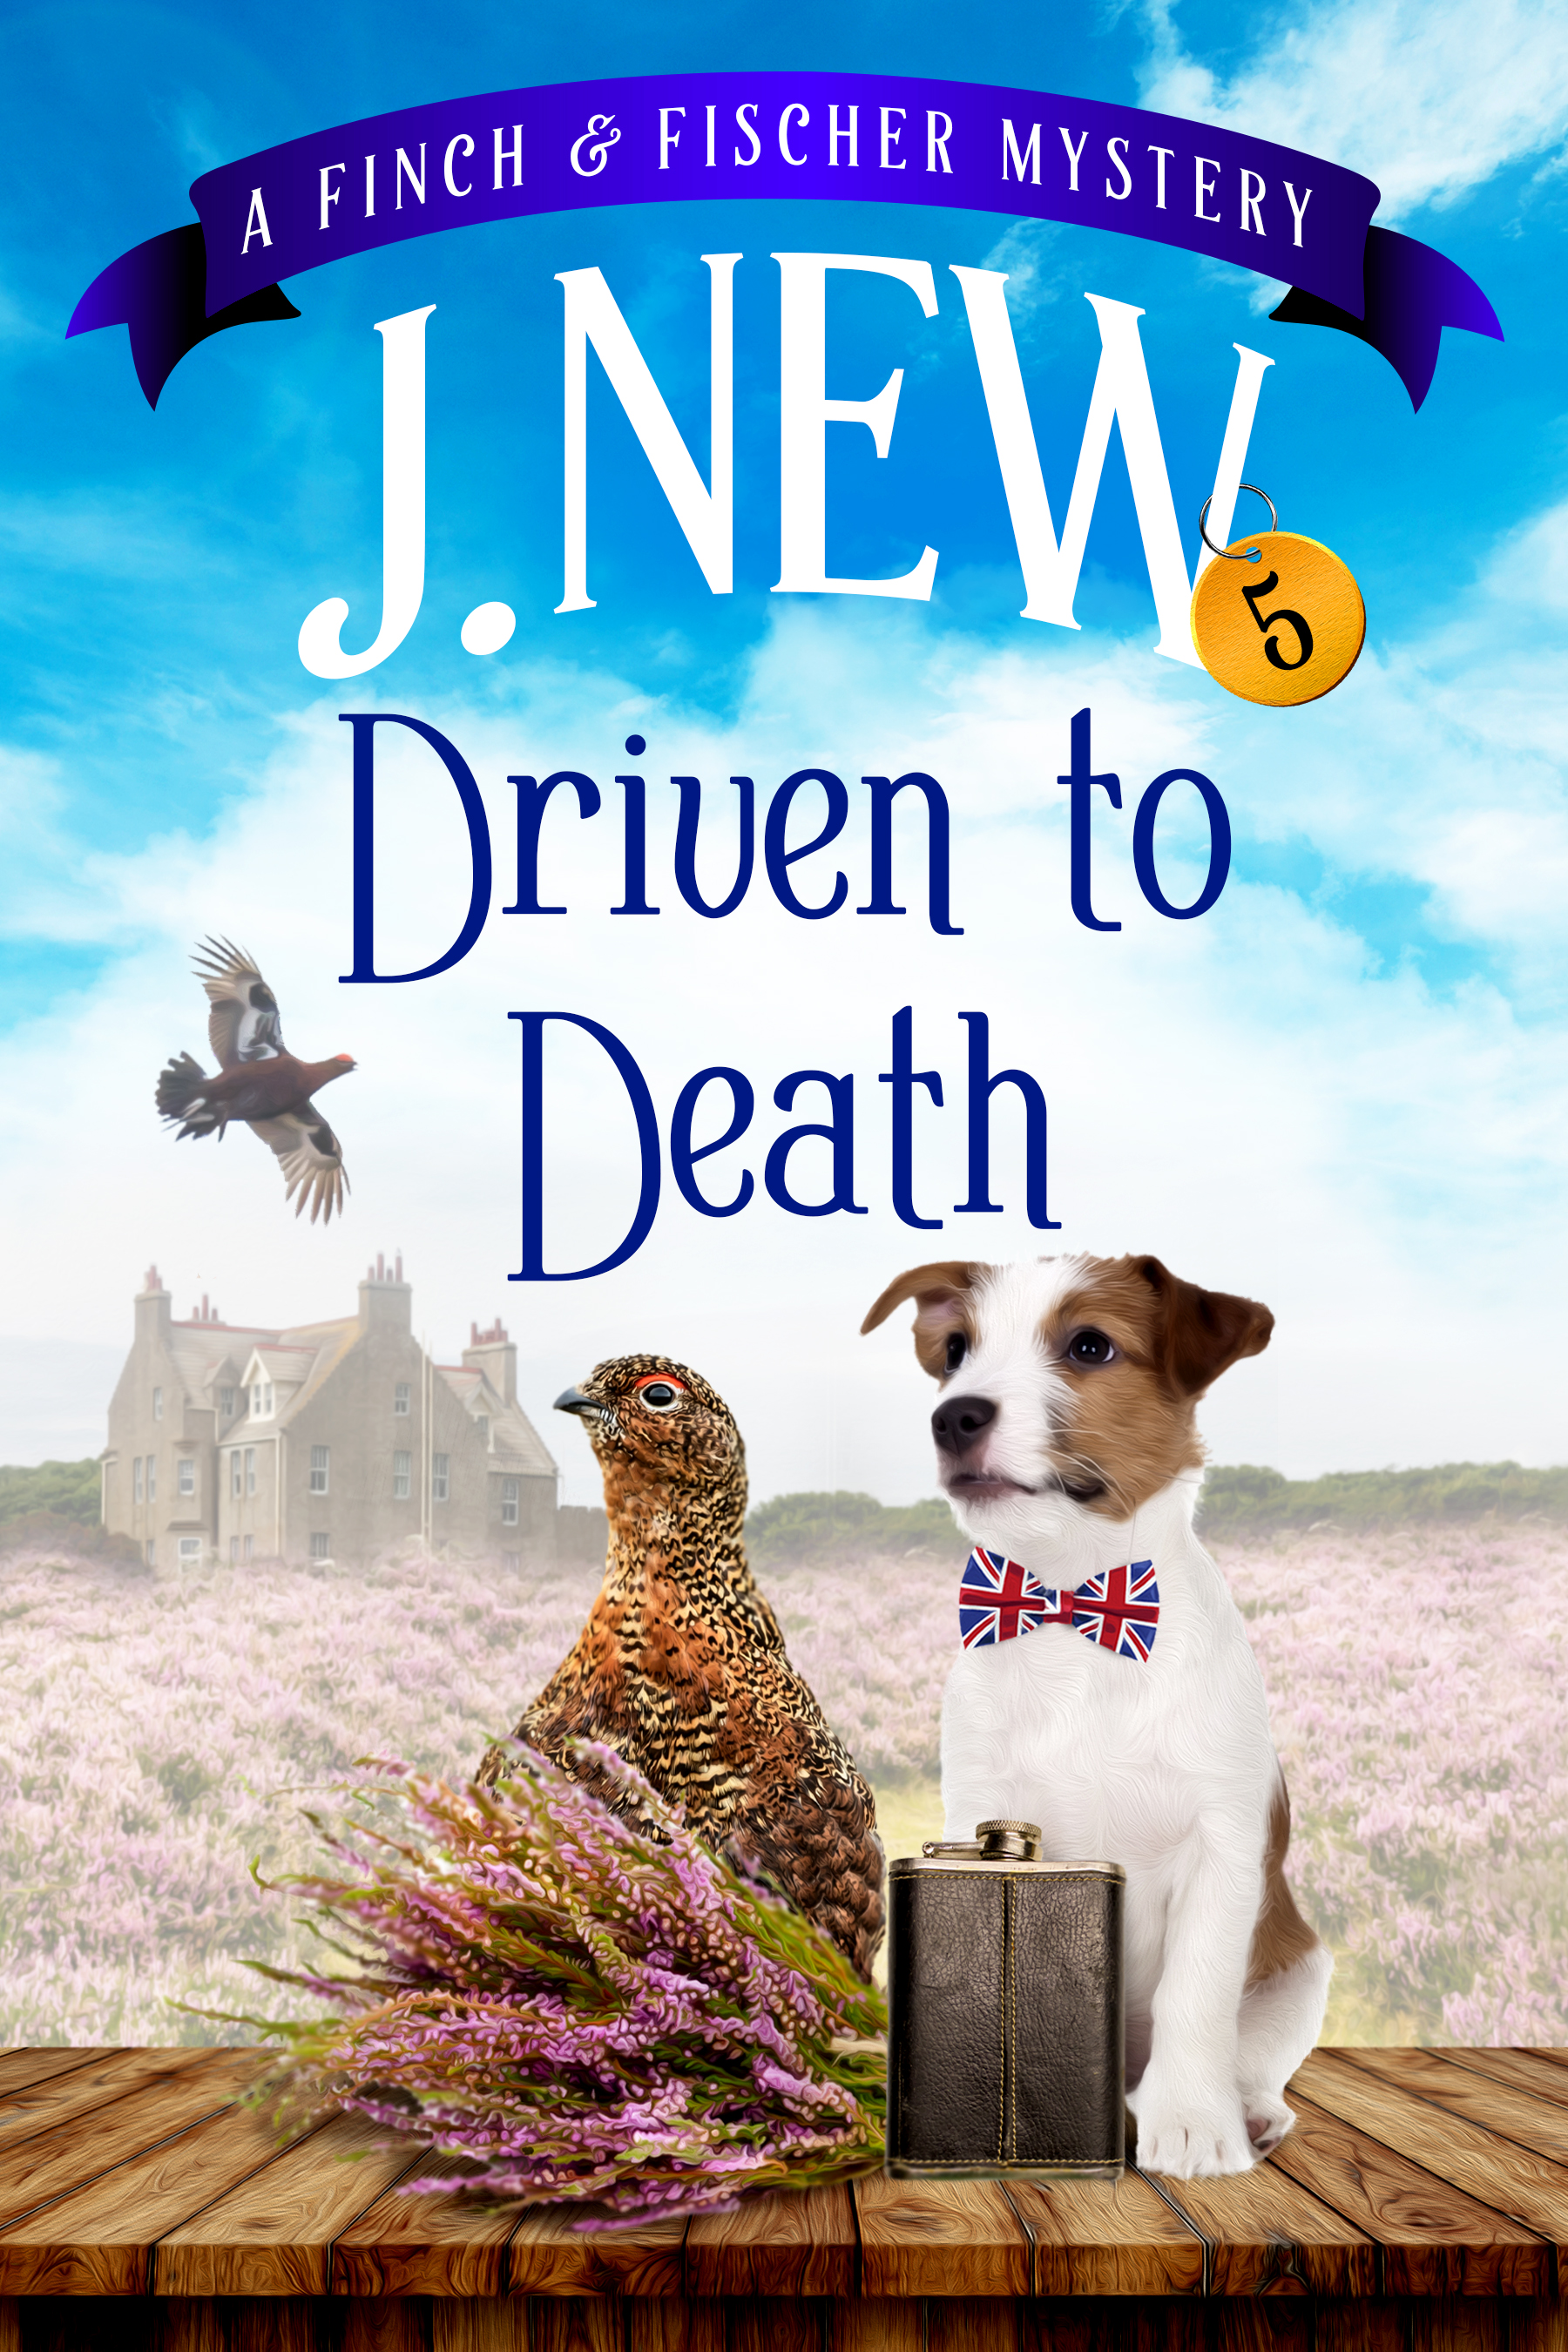 Driven to Death Book 5 in the best selling British cozy mystery series by British author J. New